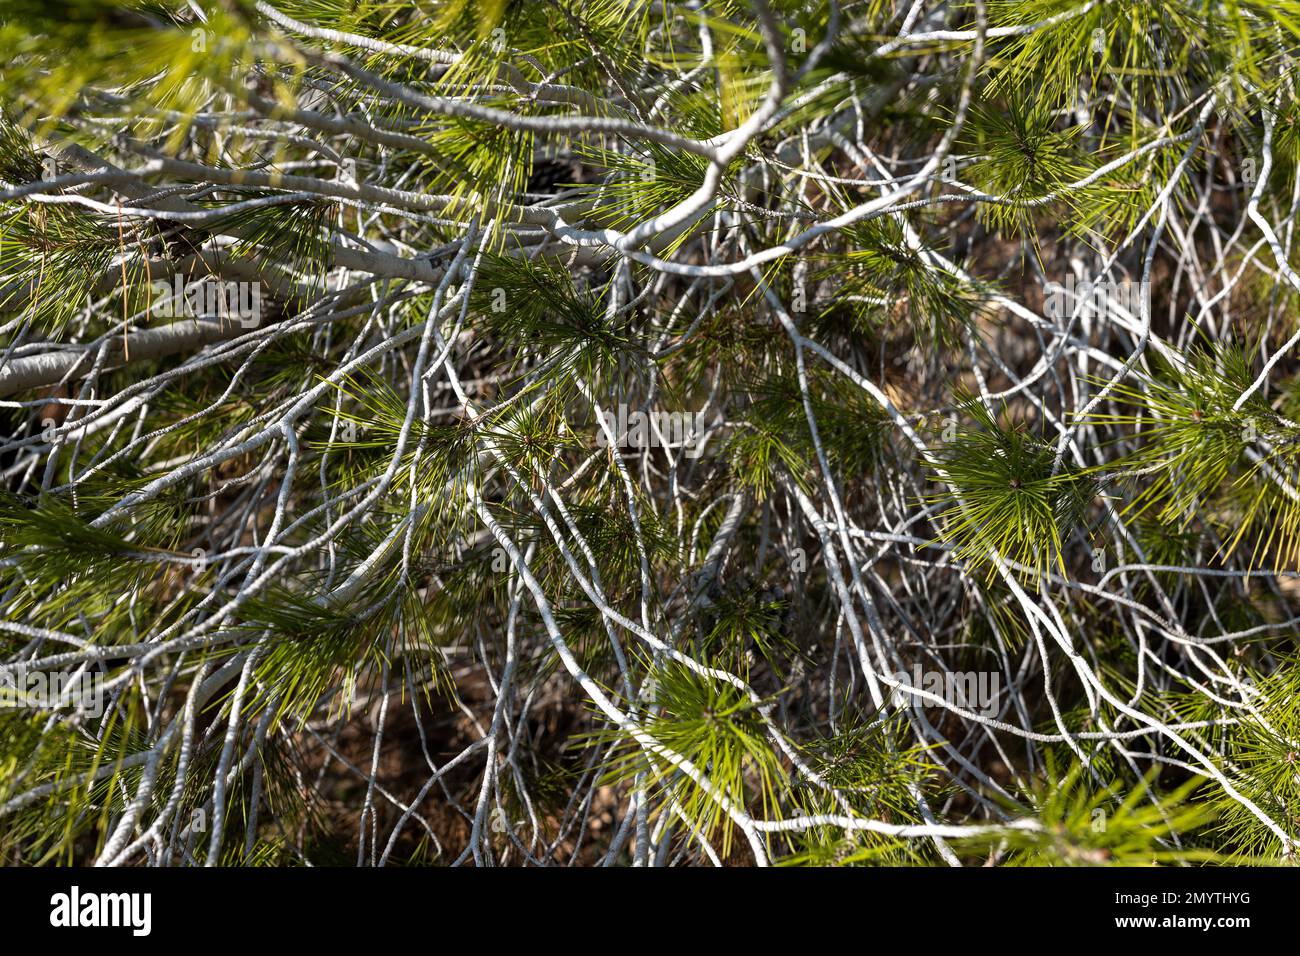 Pine branches with young cones Stock Photo